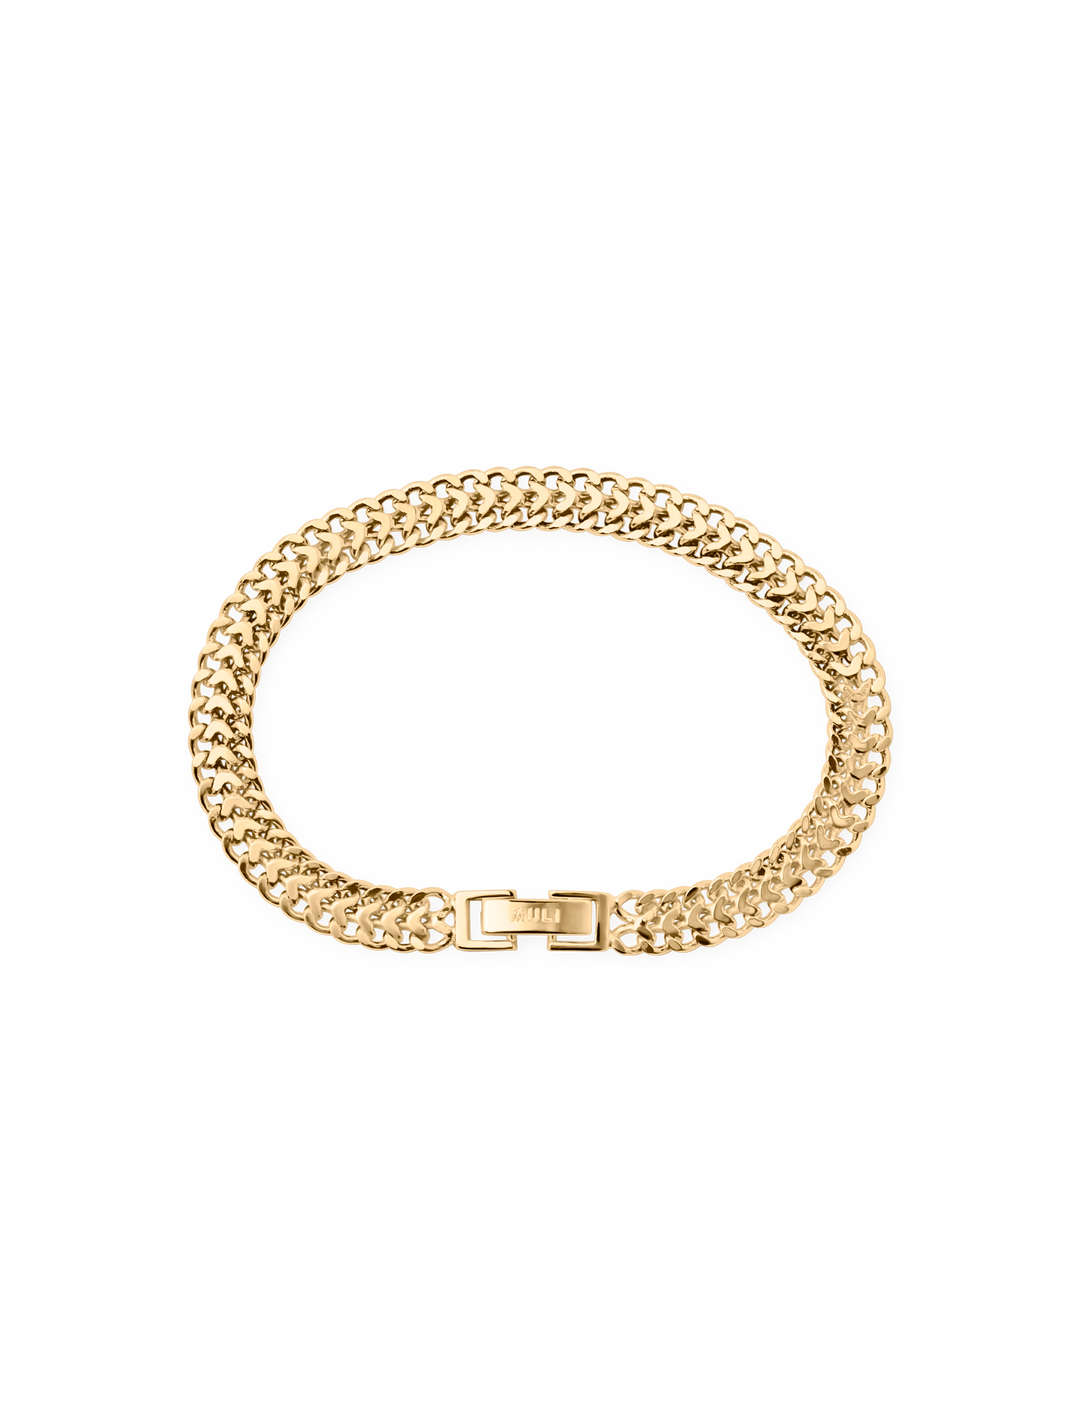 double curb chain bracelst made of 18k gold plated brass